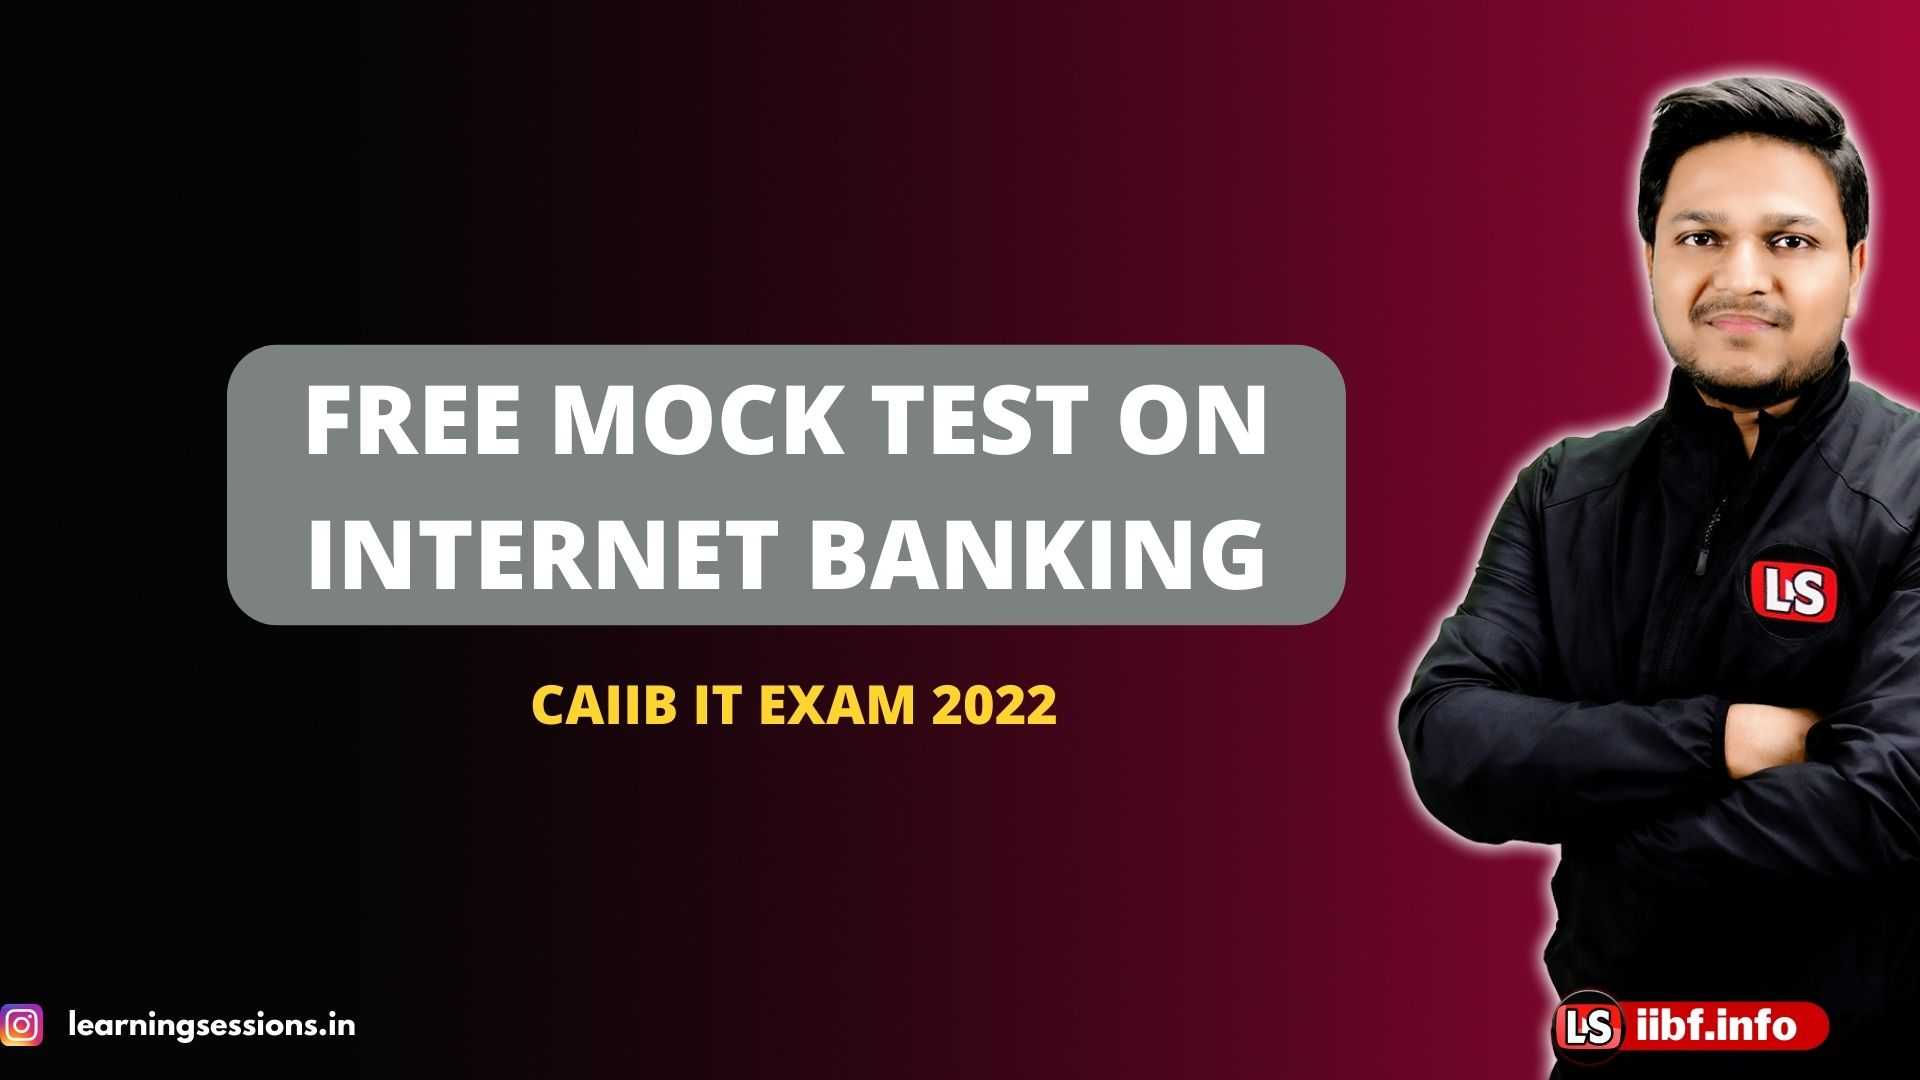 Internet Banking Free Mock Test for Practice | CAIIB IT Exam 2022